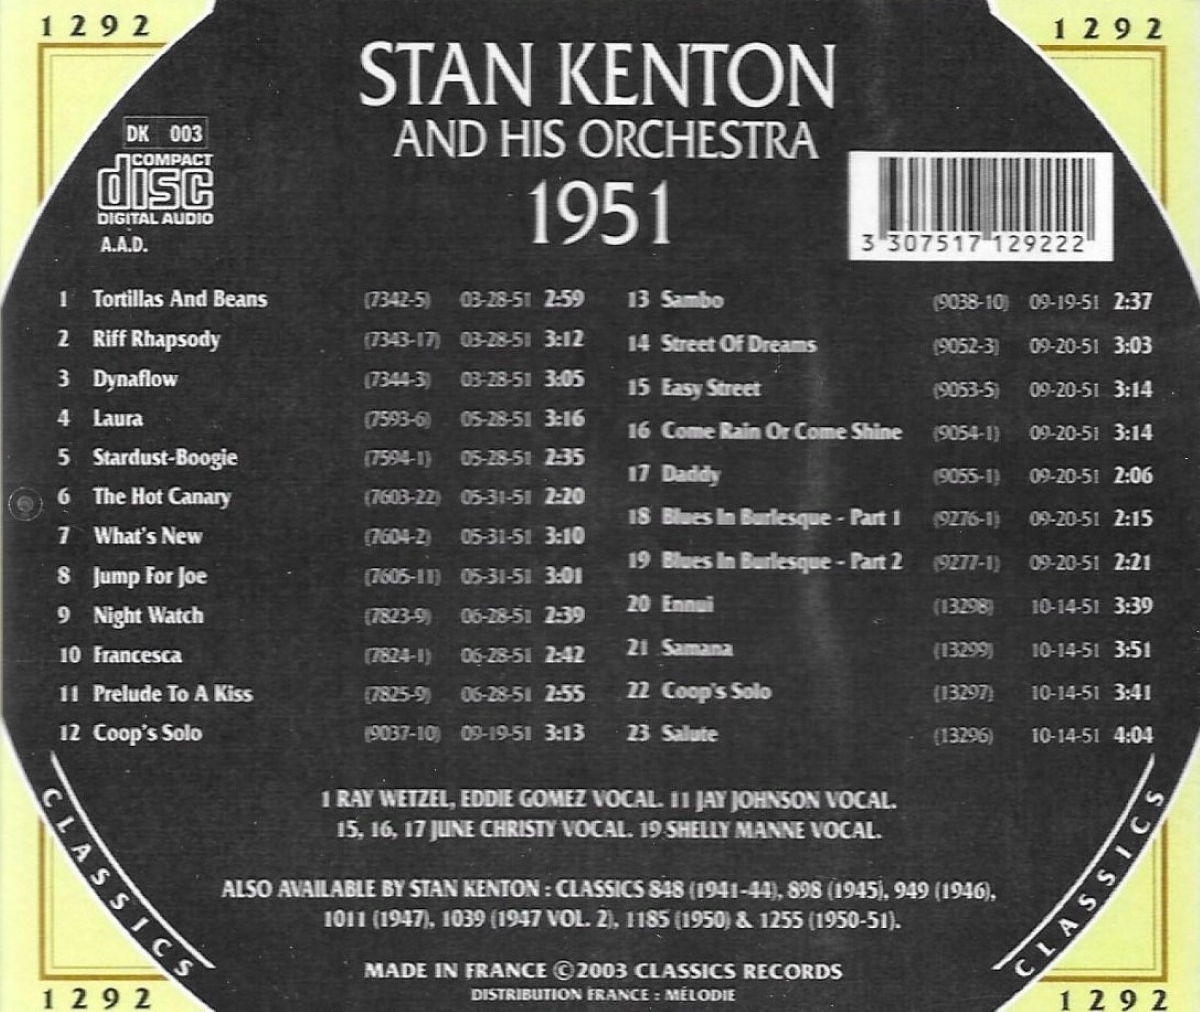 The Chronological Stan Kenton And His Orchestra: 1951